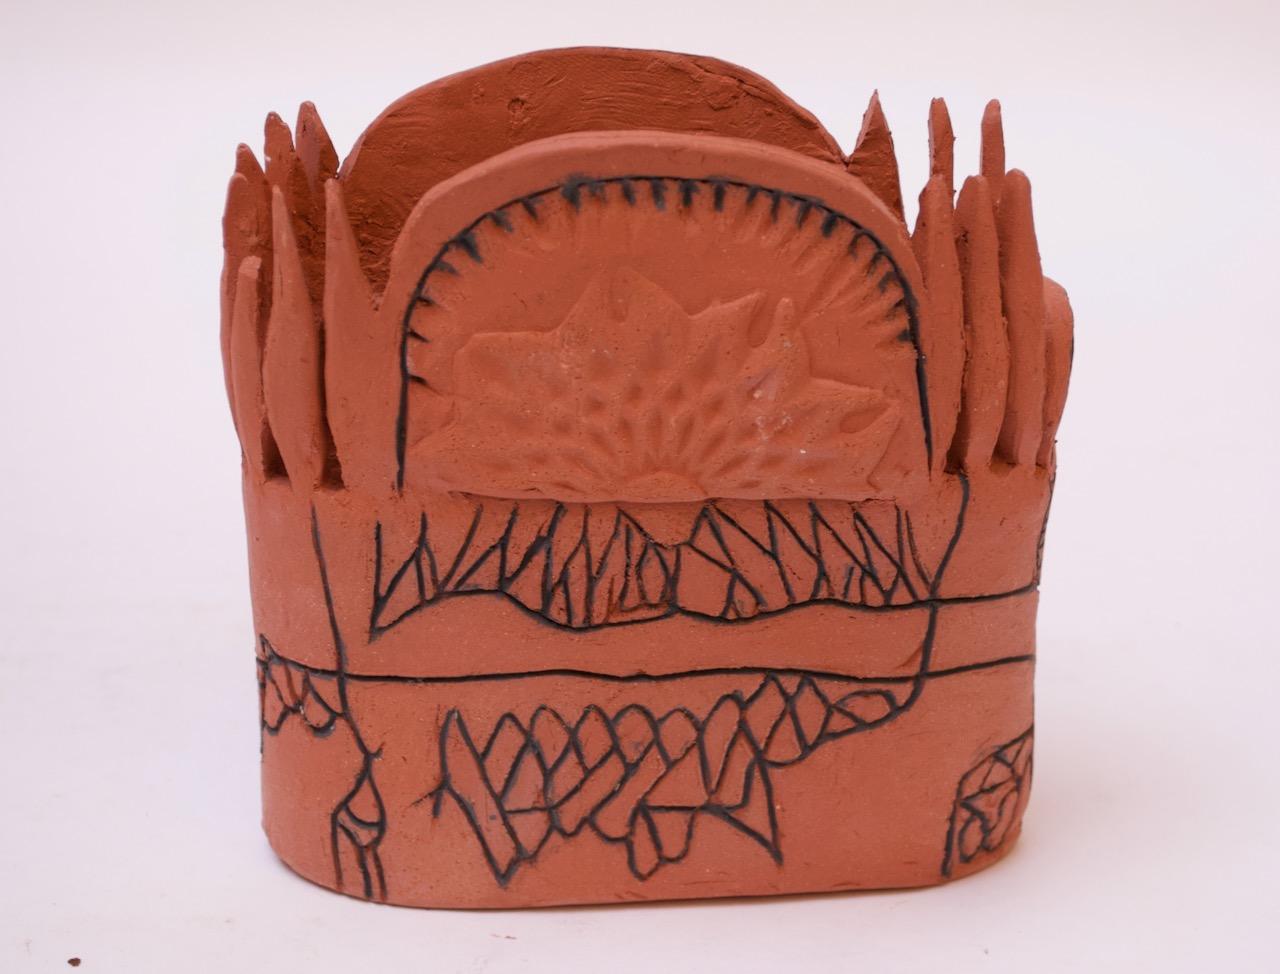 Terracotta vase with hand-drawn details with an Aztec-inspired pattern, circa 1970s USA. Molded floral central image surrounded by 